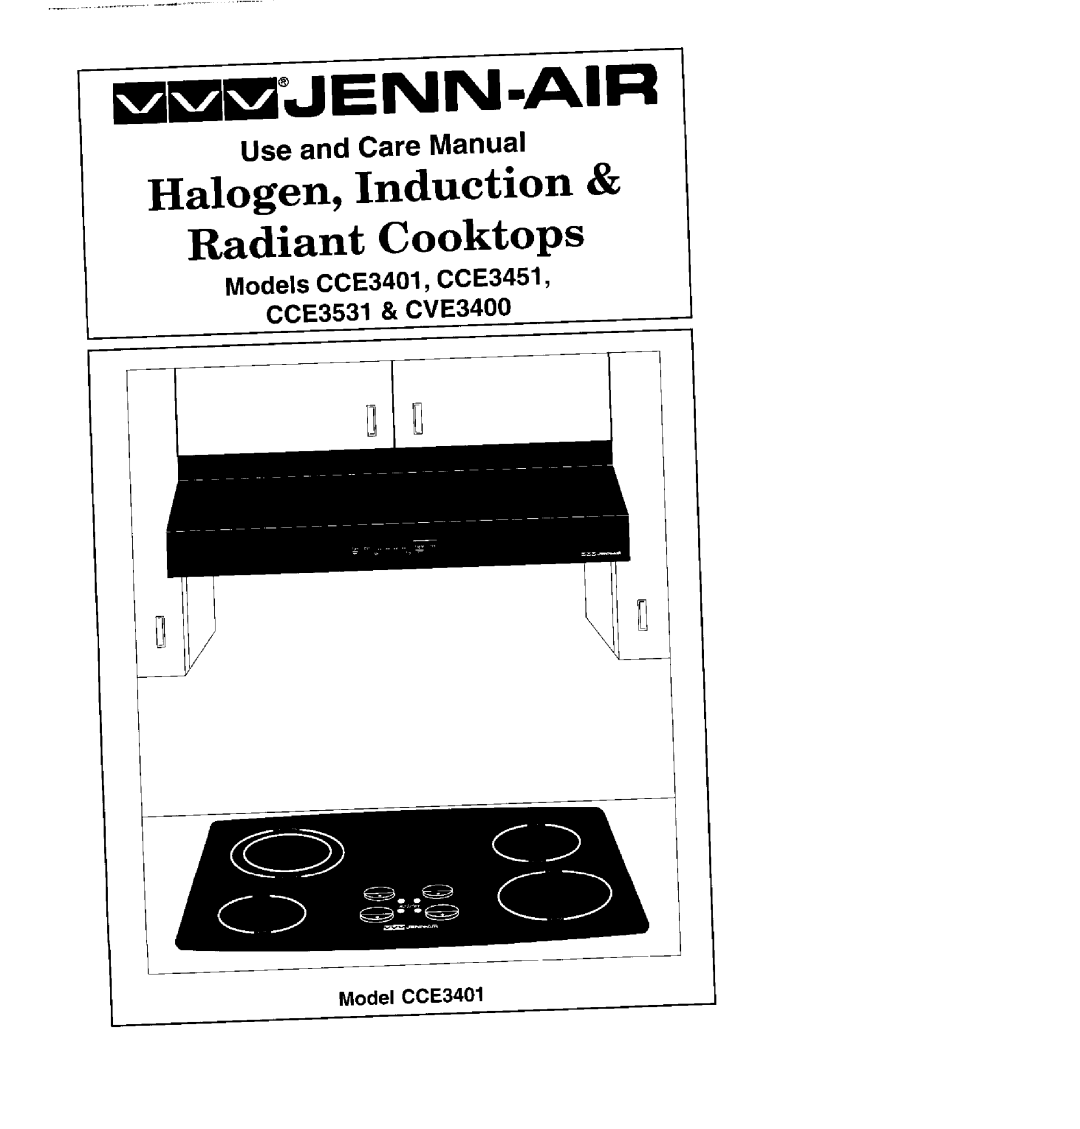 Jenn-Air CVE3400, CCE3401, CCE3531, CCE3451 manual Jenn.Air, Halogen, Induction & Radiant Cooktops, Use and Care Manual 